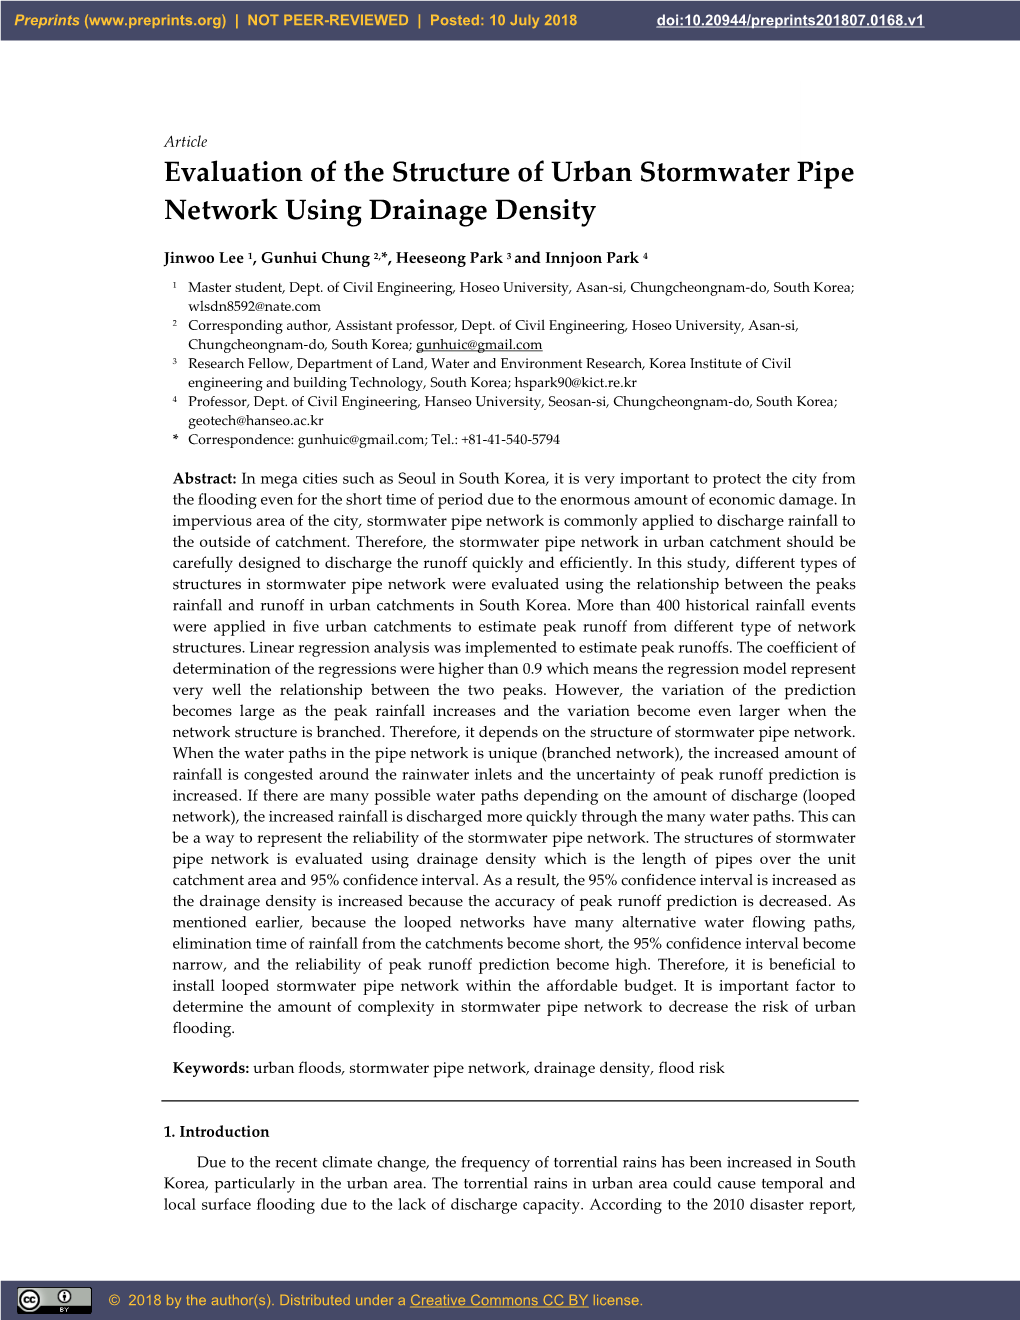 Evaluation of the Structure of Urban Stormwater Pipe Network Using Drainage Density